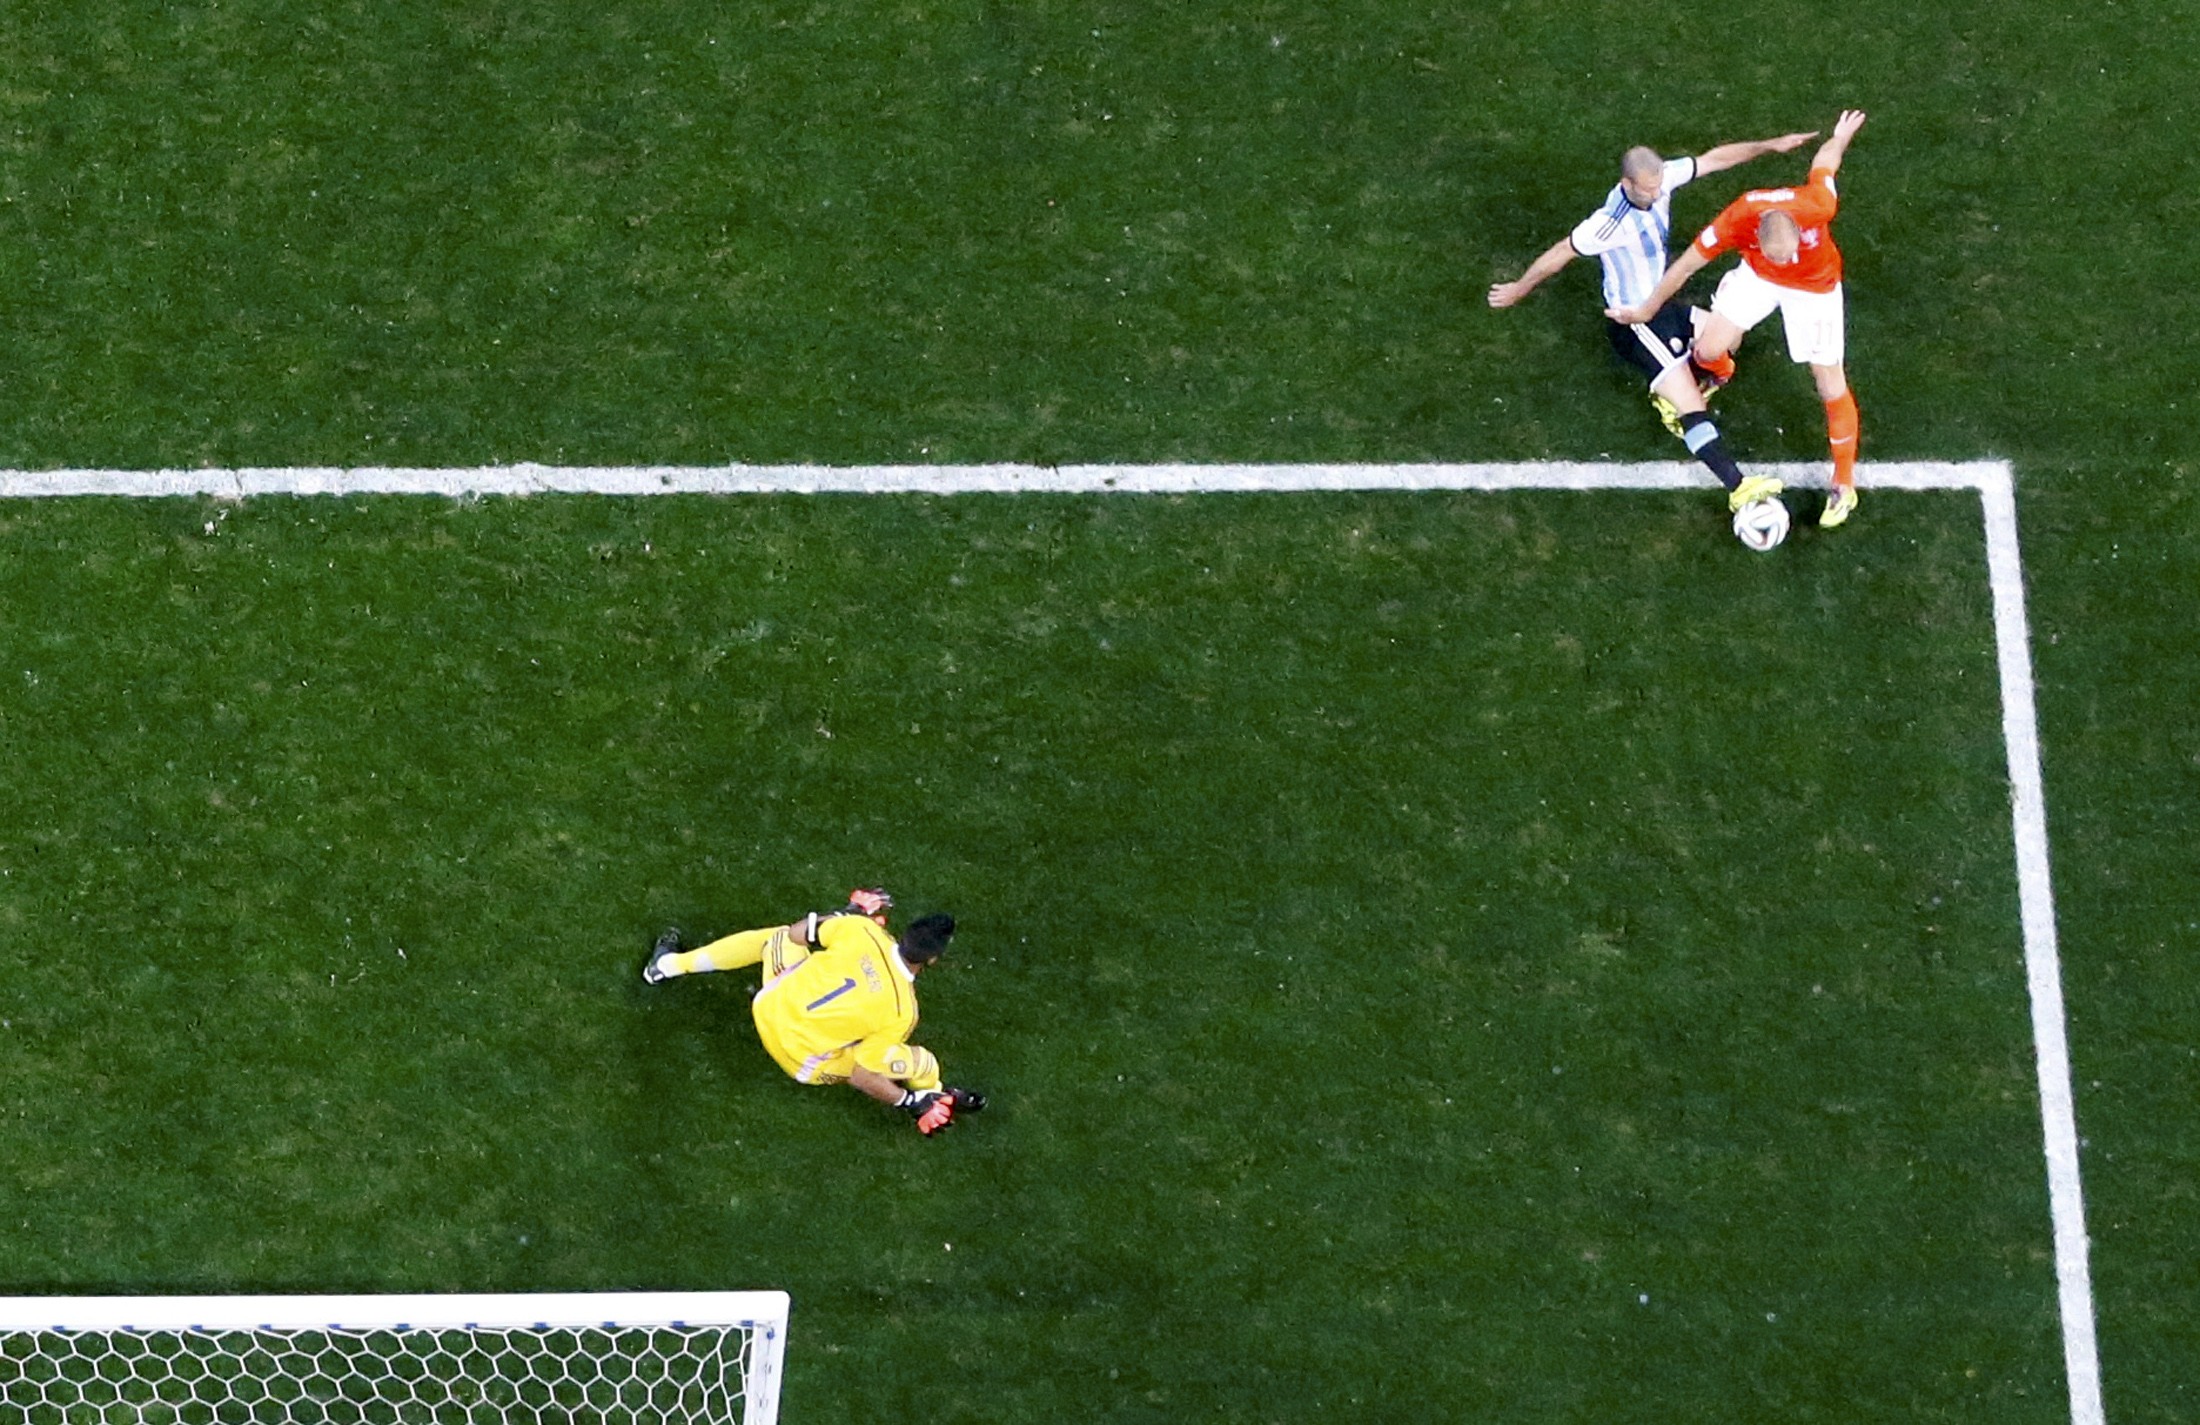 Argentina's Javier Mascherano deflects a shot by Arjen Robben of the Netherlands during their 2014 World Cup semi-finals at the Corinthians arena